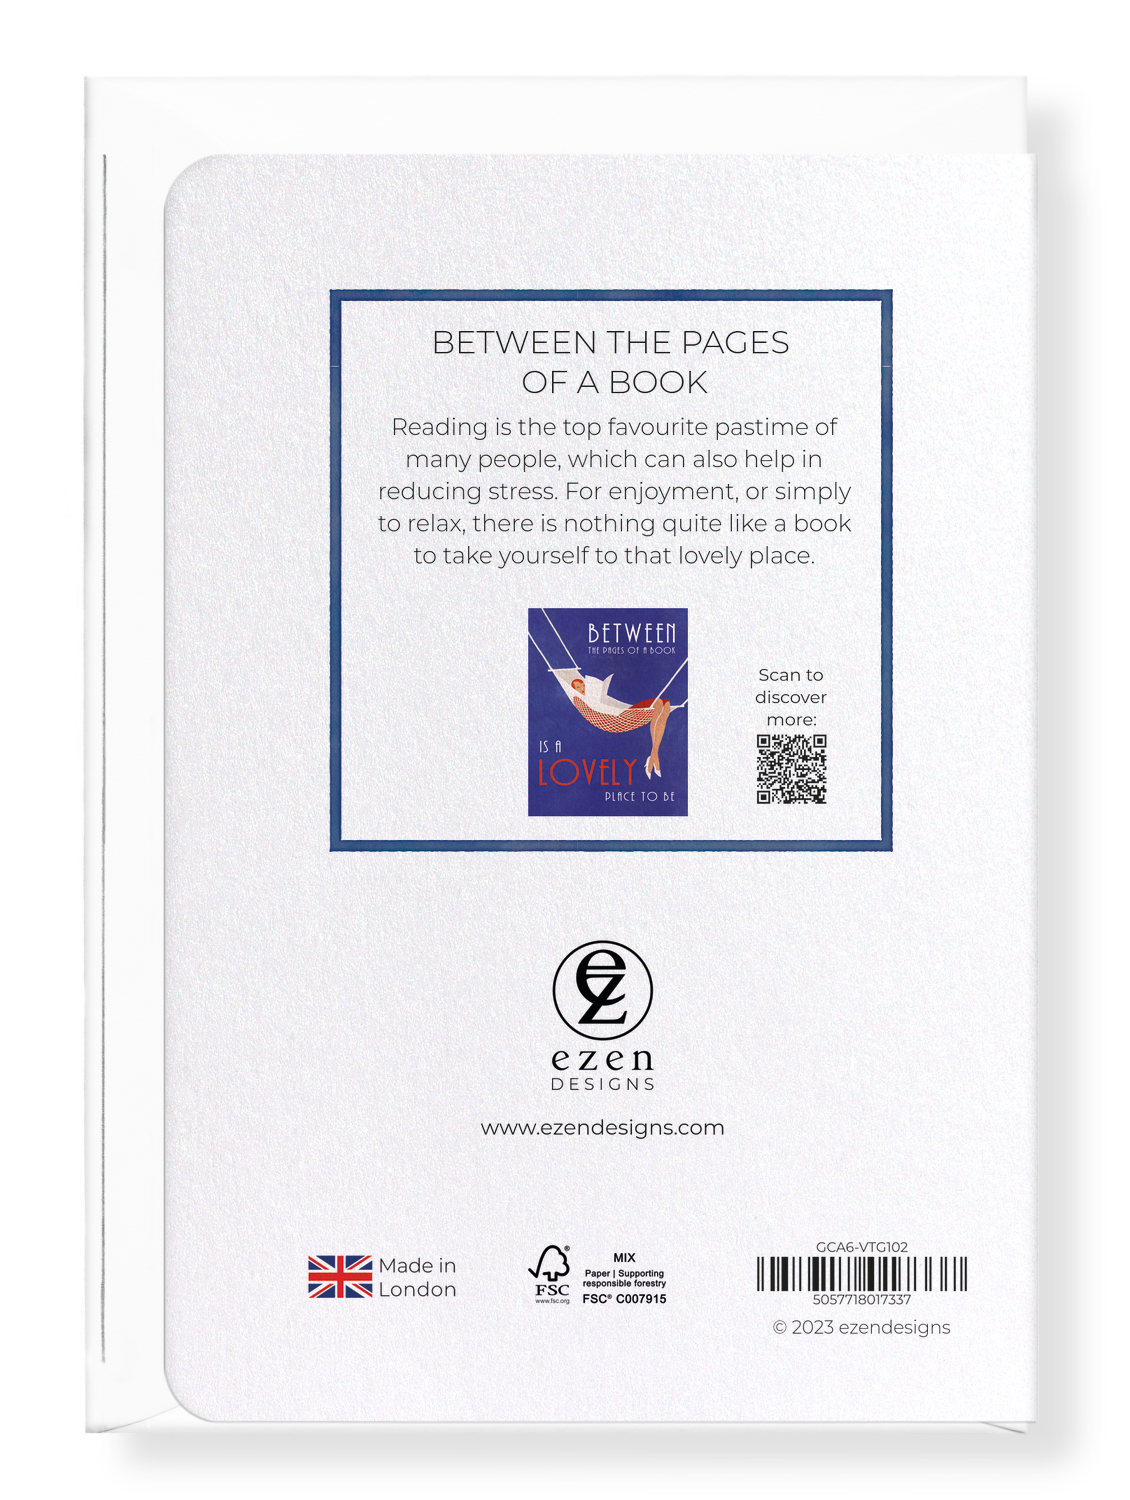 Ezen Designs - Between the Pages of a Book - Greeting Card - Back